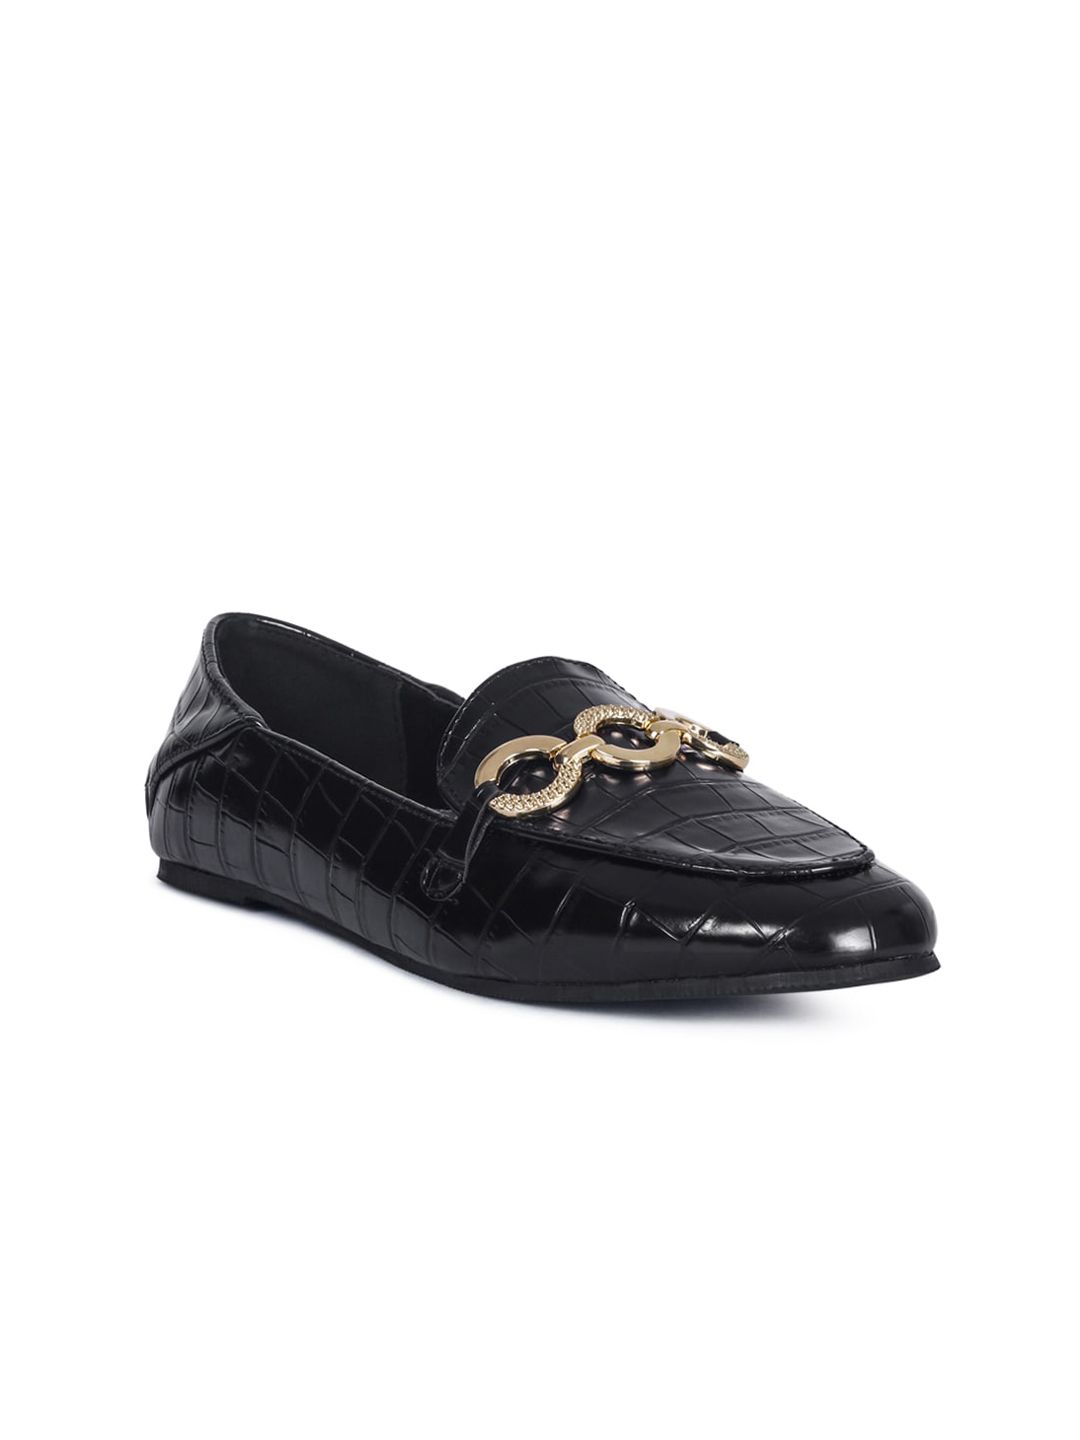 London Rag Women Black Croc Textured Loafers Price in India